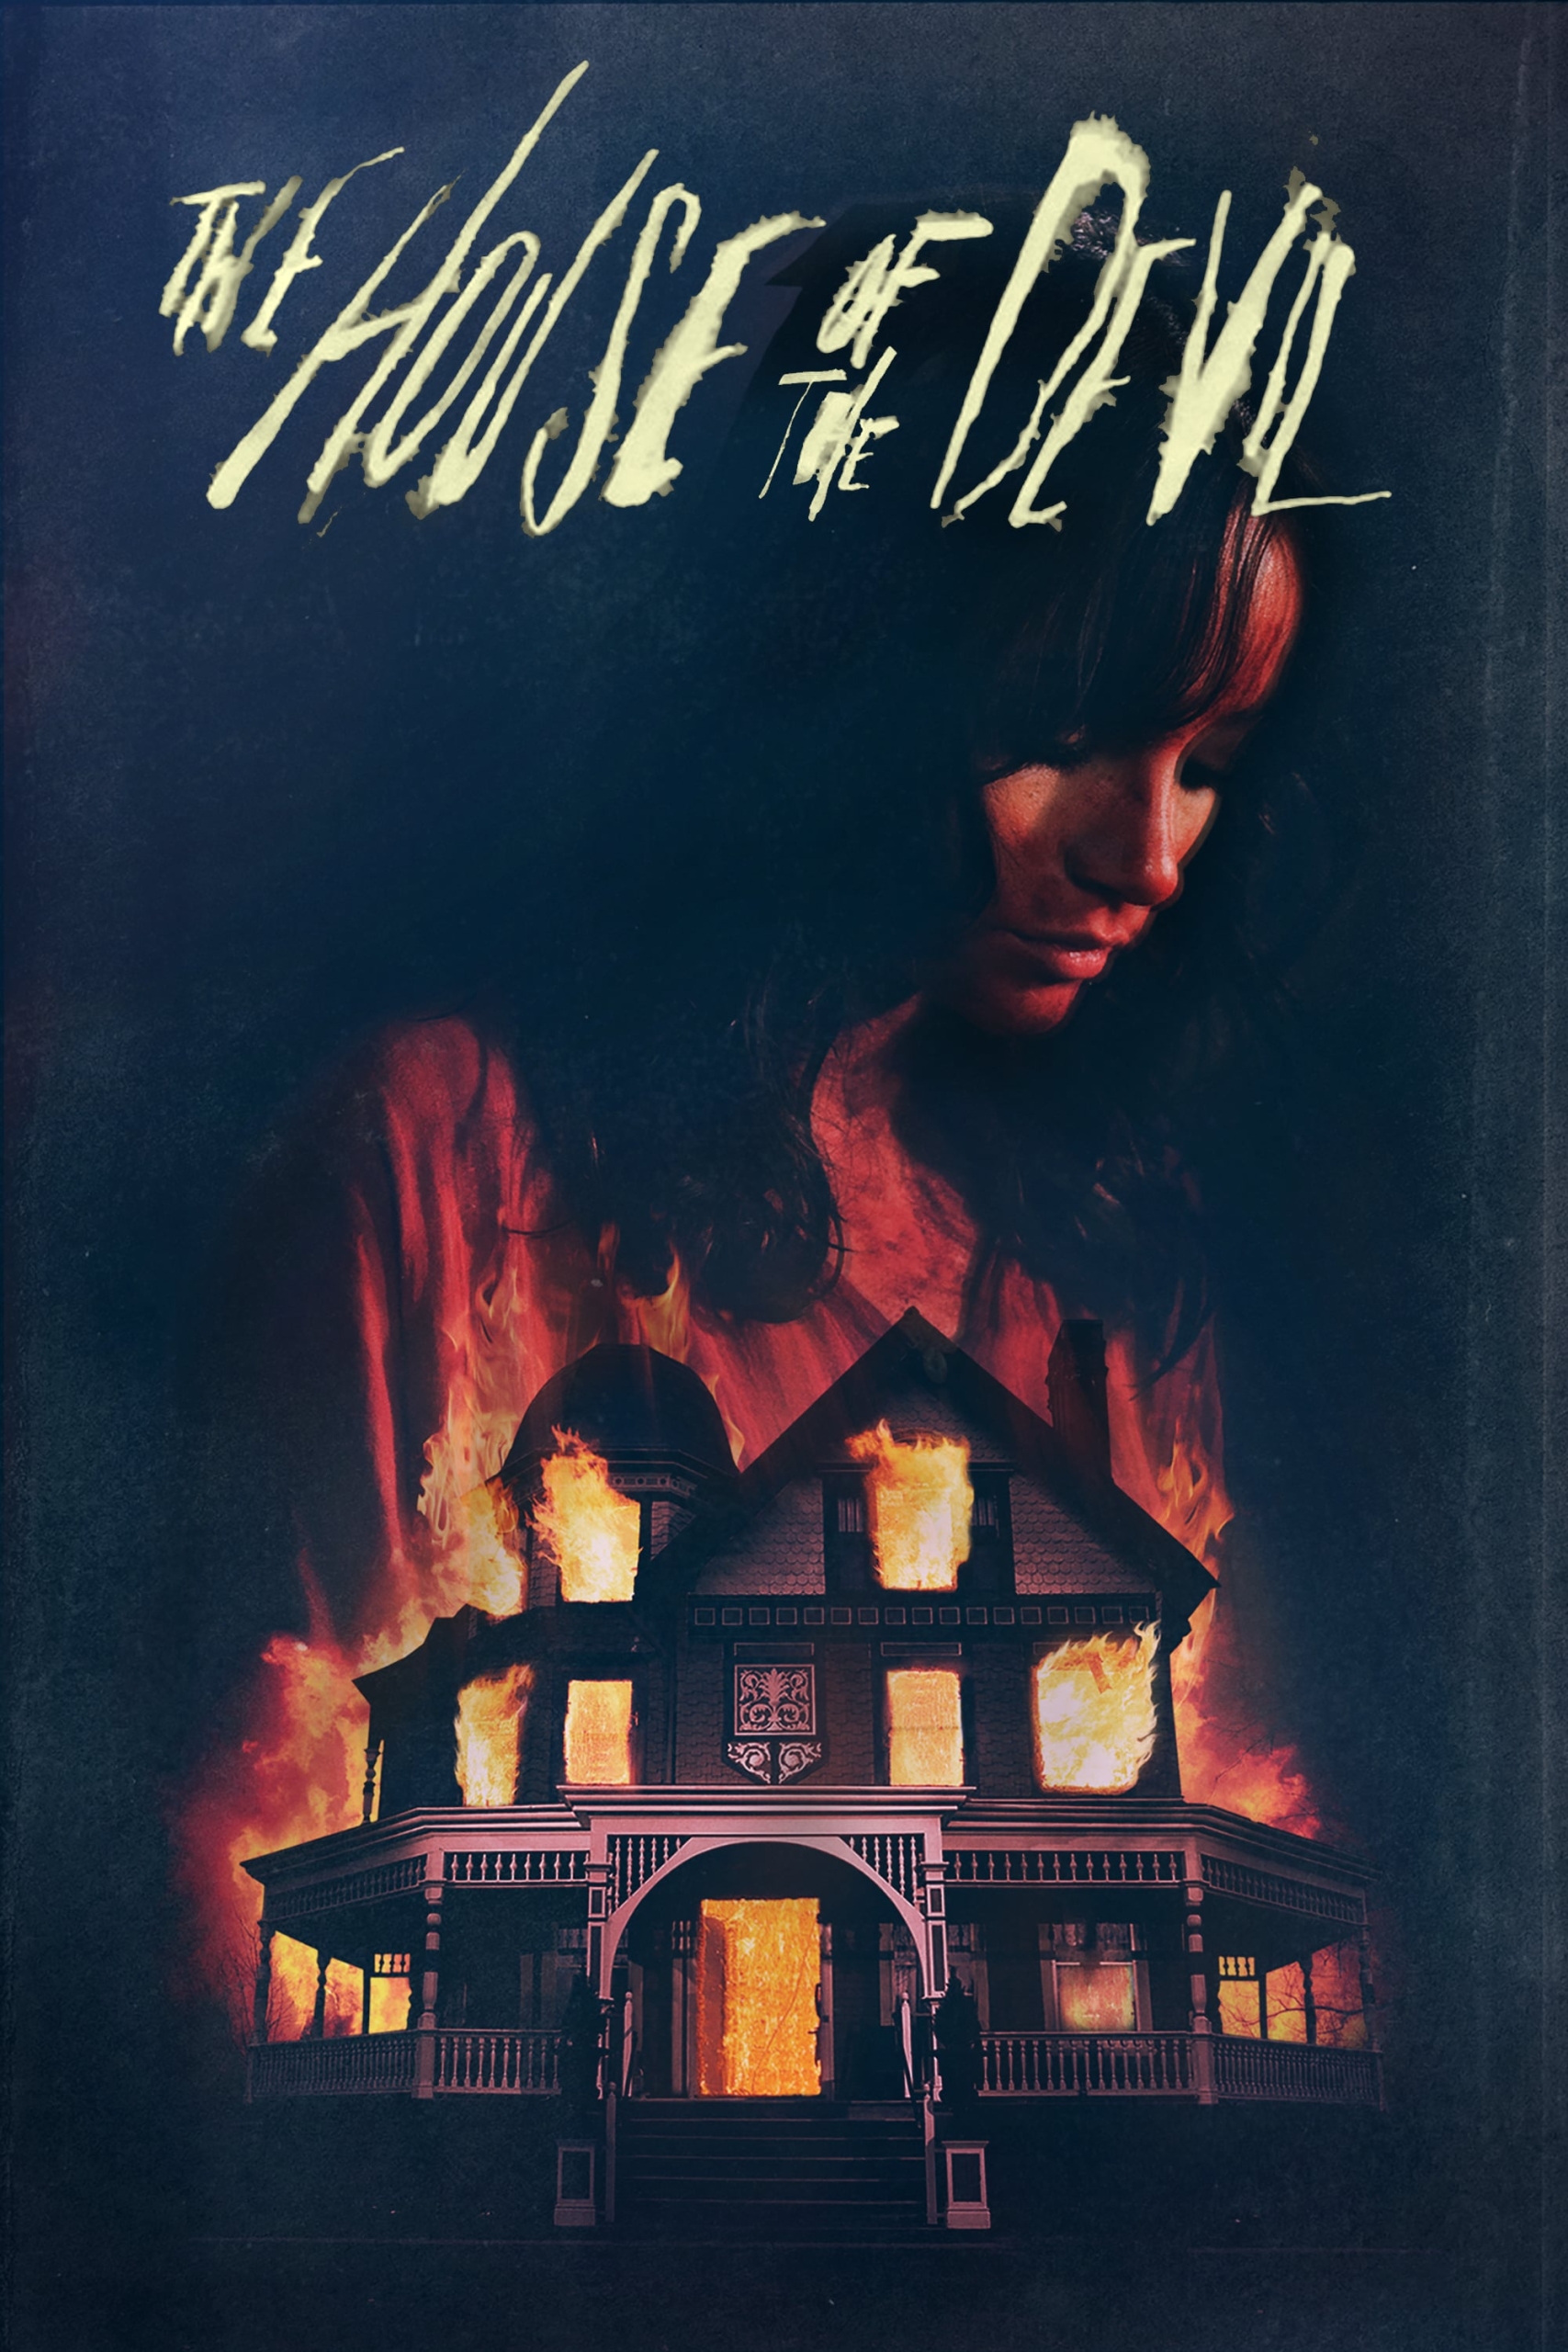 Poster for the movie "The House of the Devil"